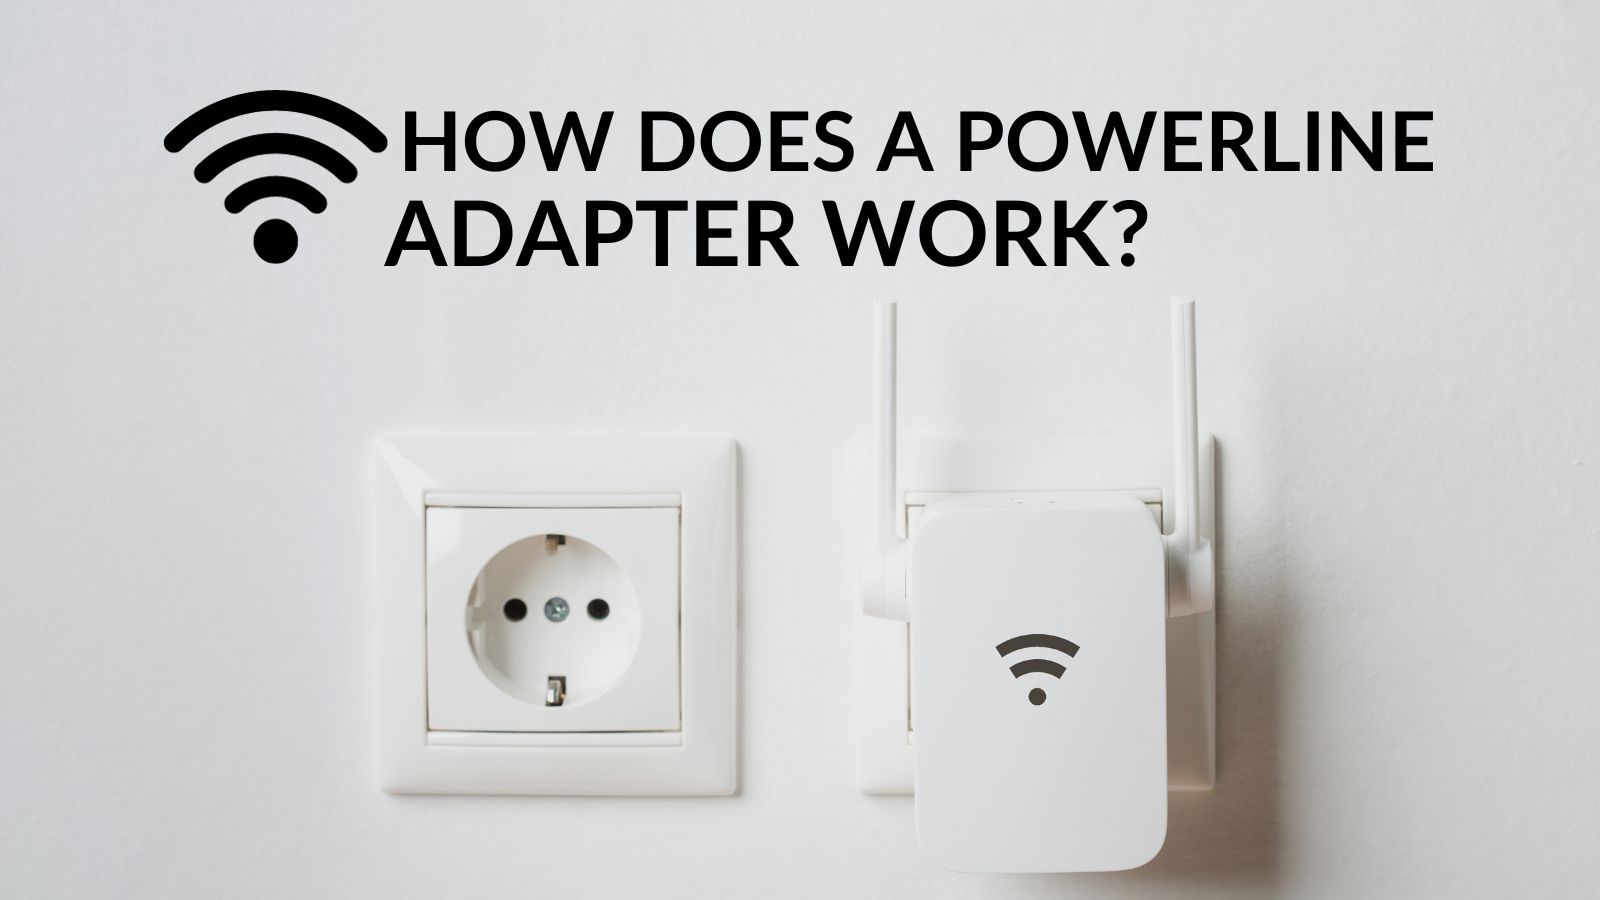 How Does a Powerline Adapter Work?